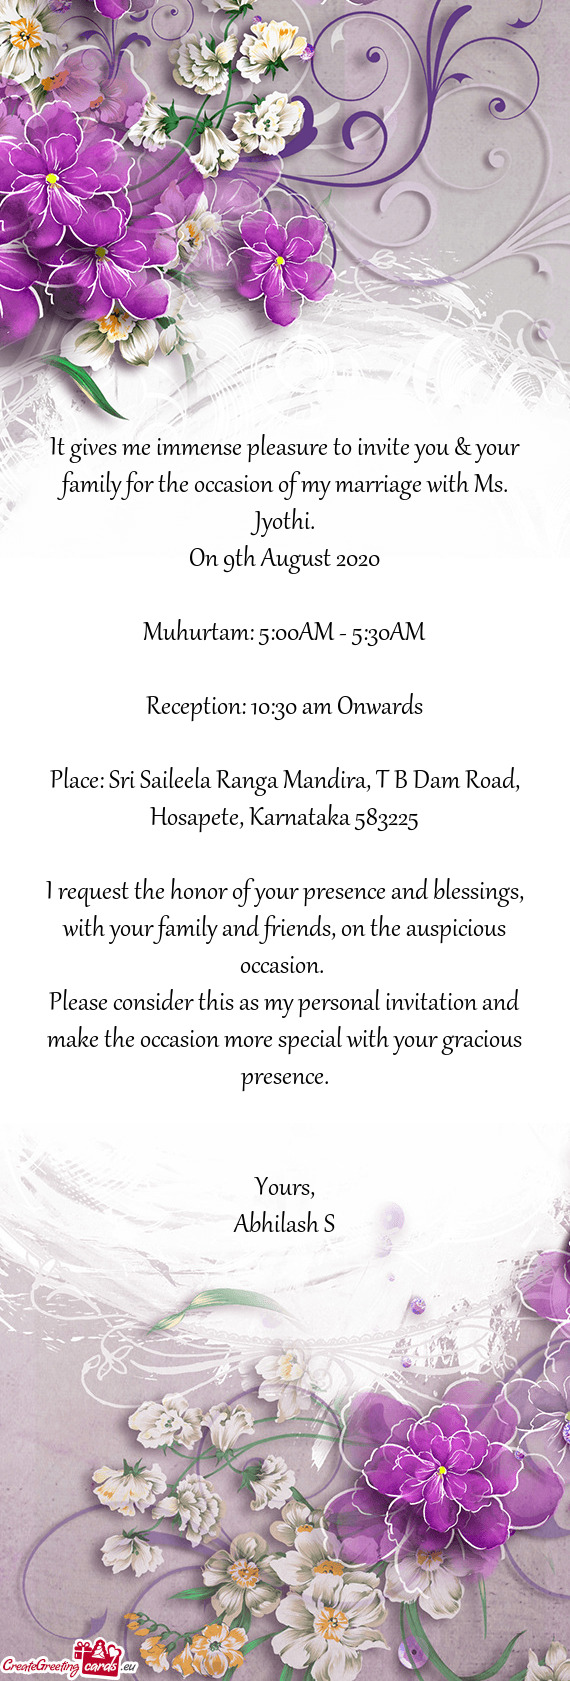 It gives me immense pleasure to invite you & your family for the occasion of my marriage with Ms. Jy